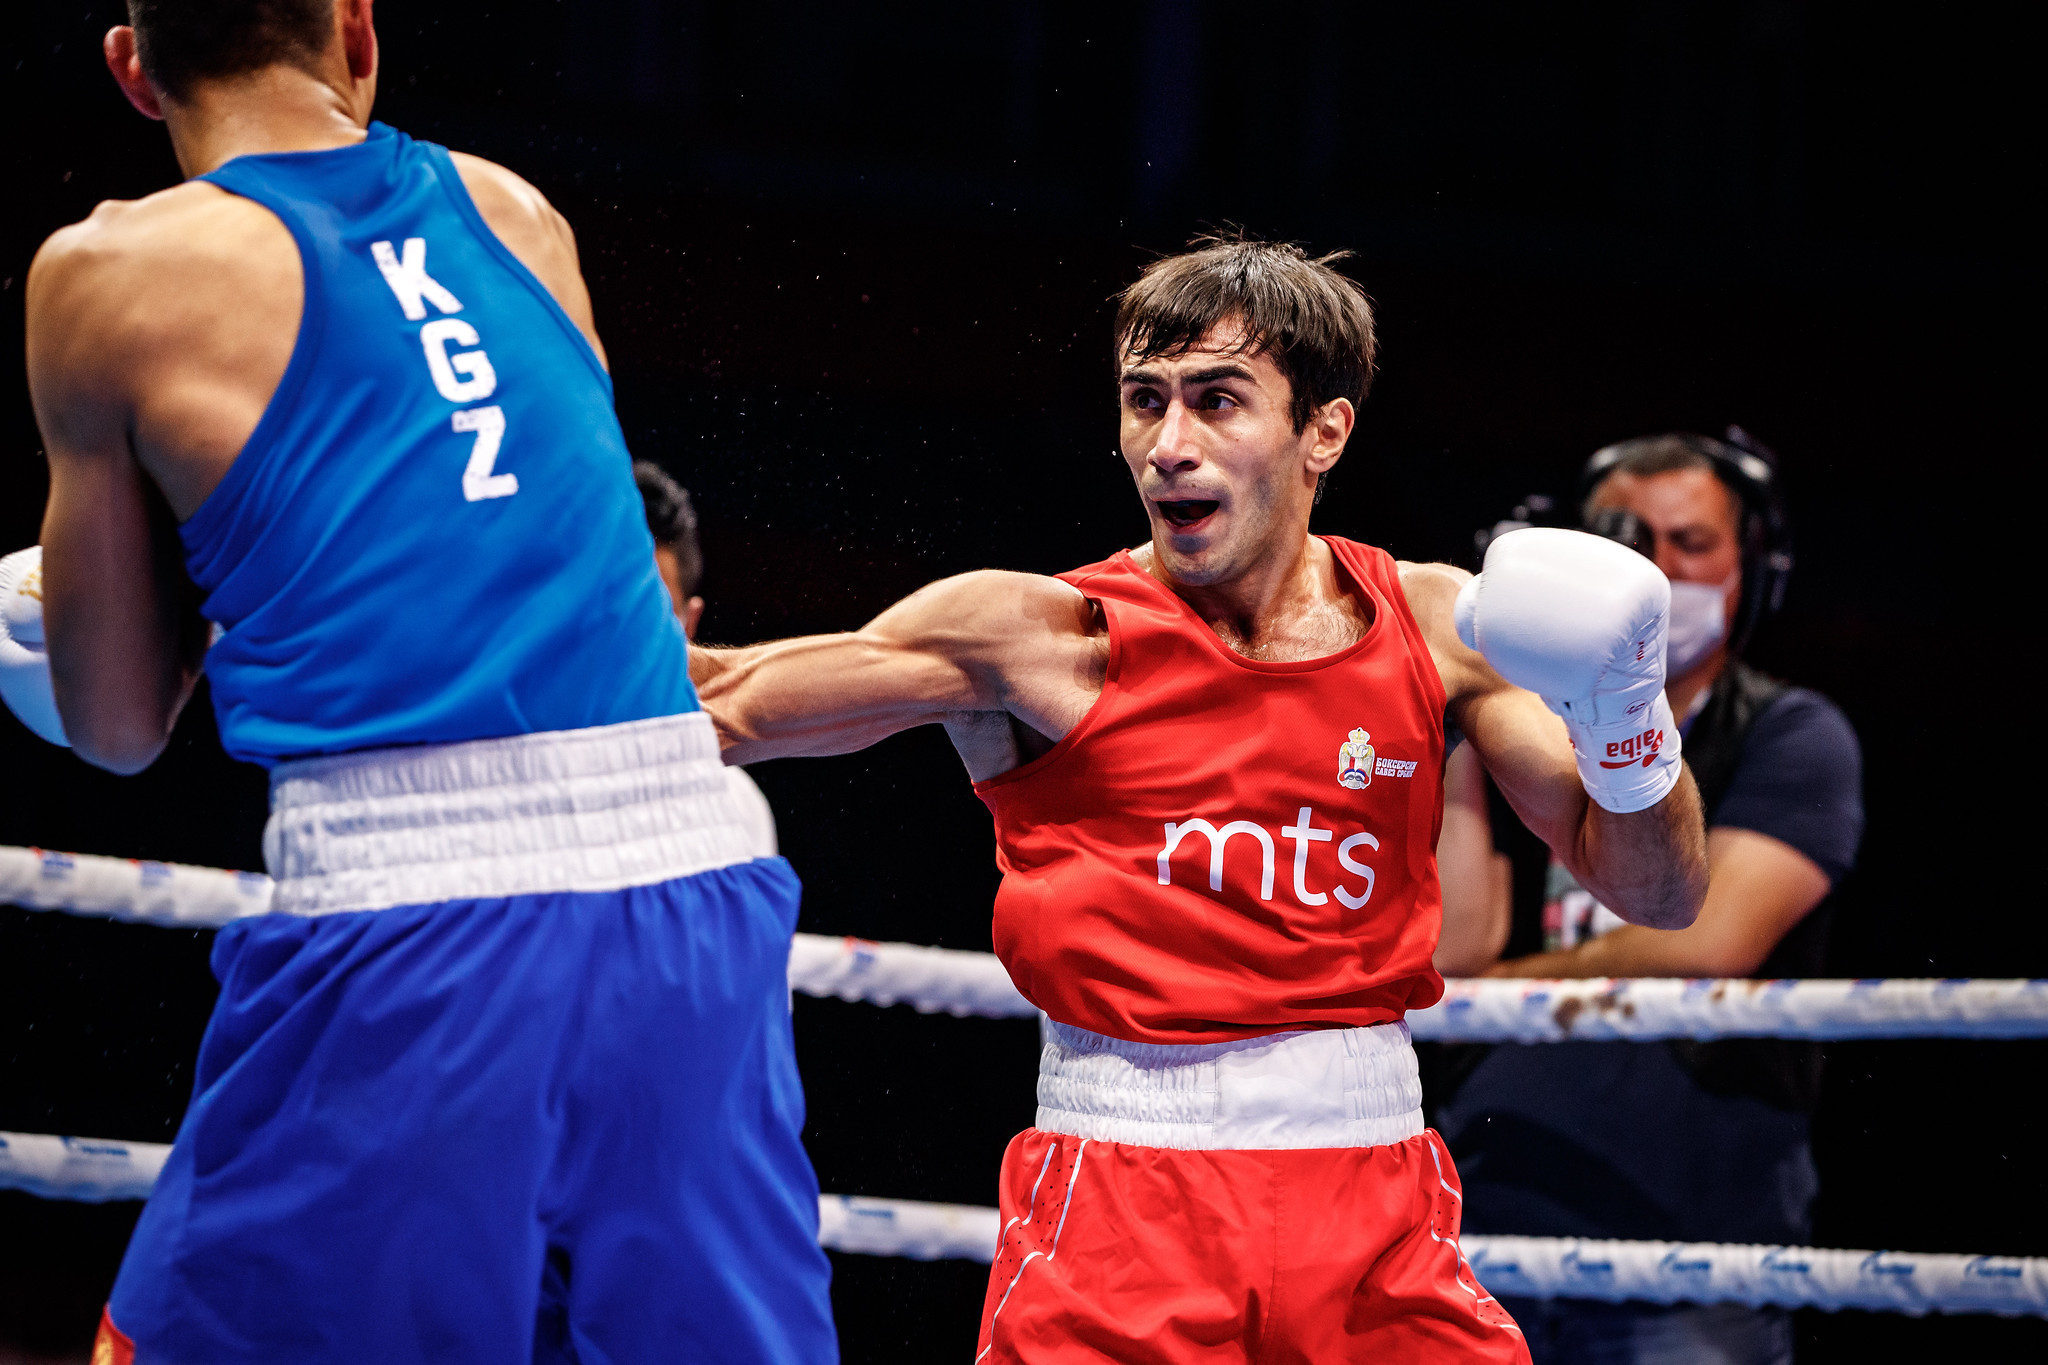 Vakhid Abbasov wrapped up a win for Serbia today in the under-67kg category ©AIBA 